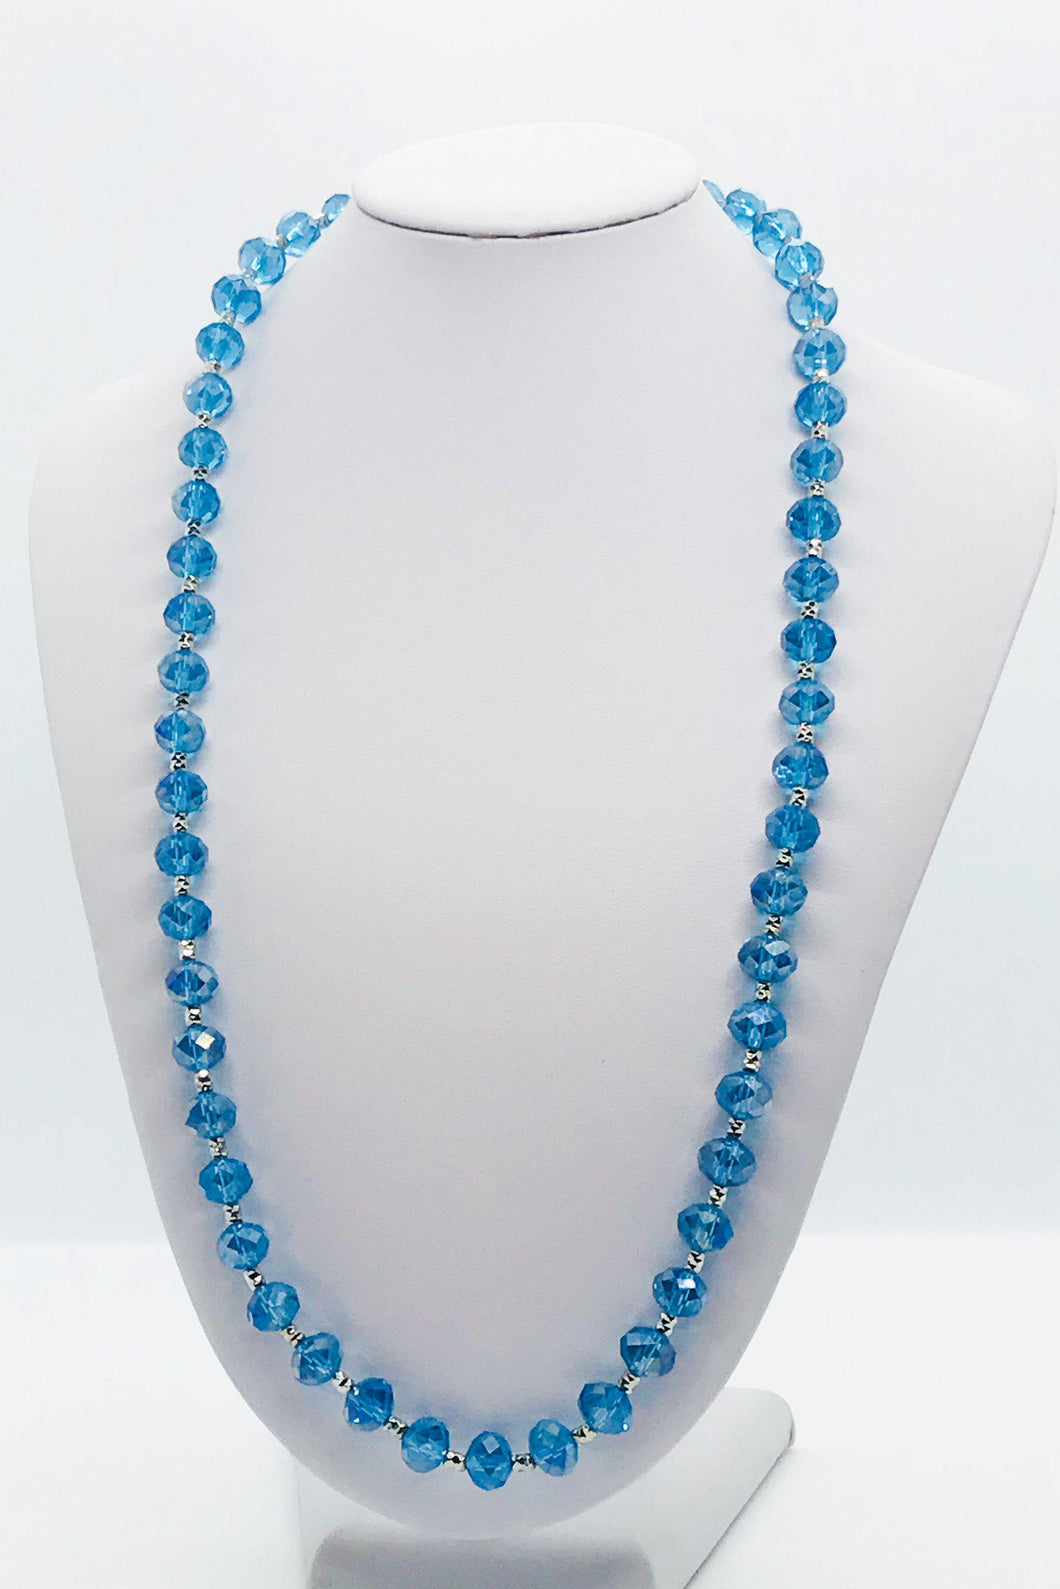 Blue Glass Bead Necklace - N183